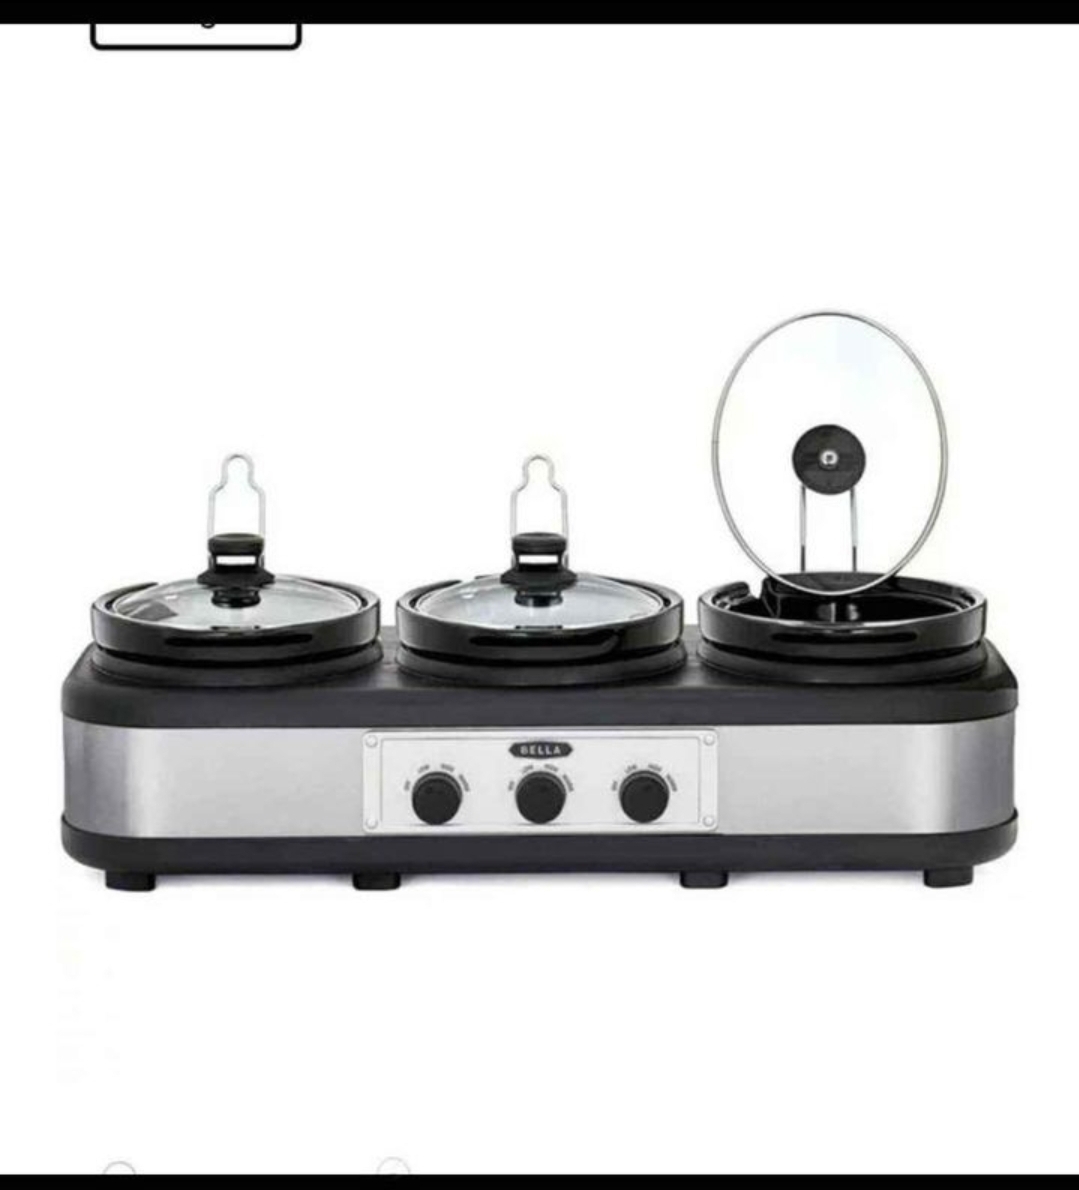 Bella 3x2.5 quart Triple Slow Cooker Stainless Steel/Black Boxes not in perfect condition - image 2 of 5